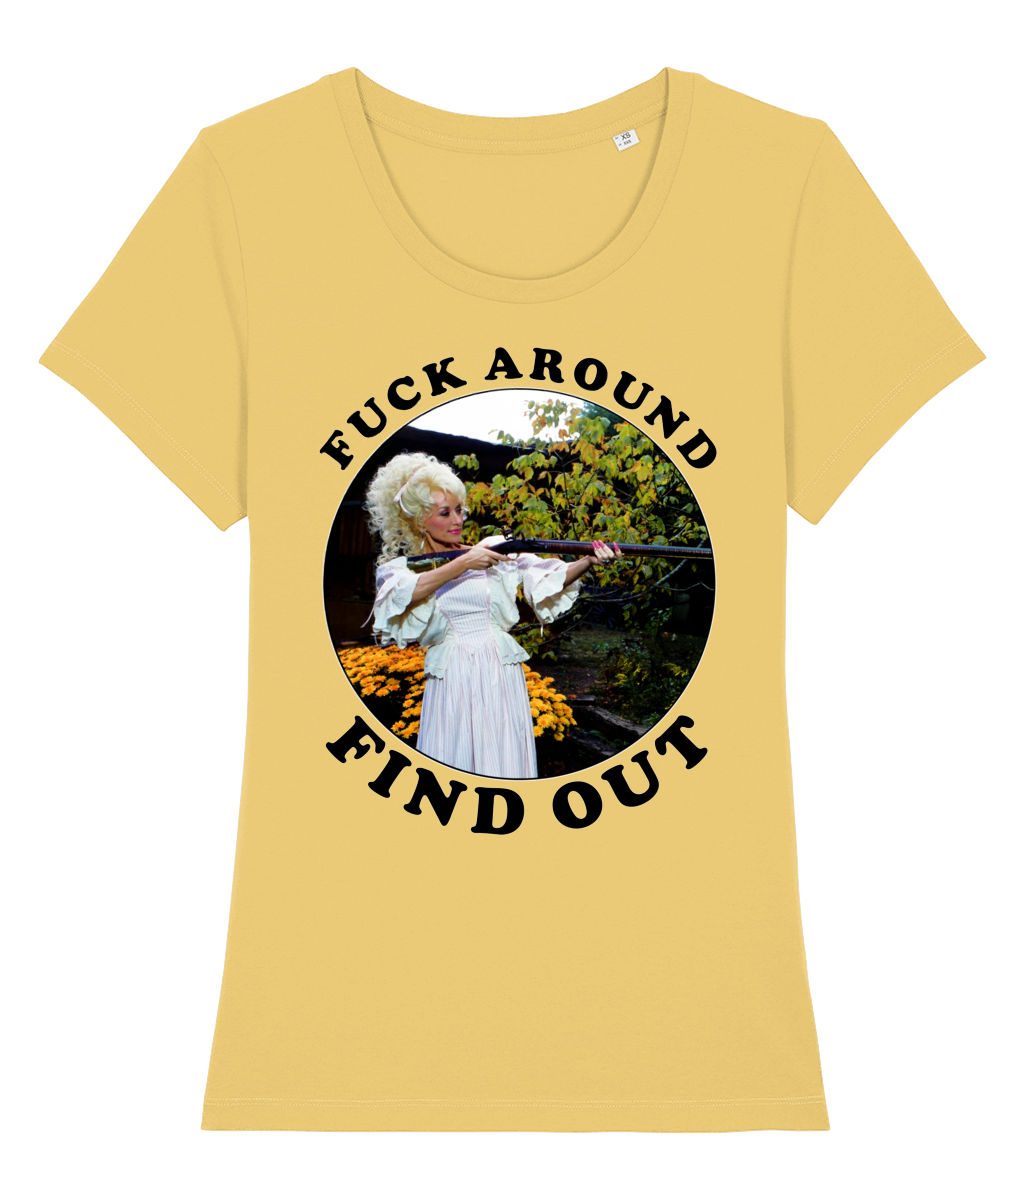 Dolly Parton - F**k Around Find Out - Black Text - Women's T Shirt